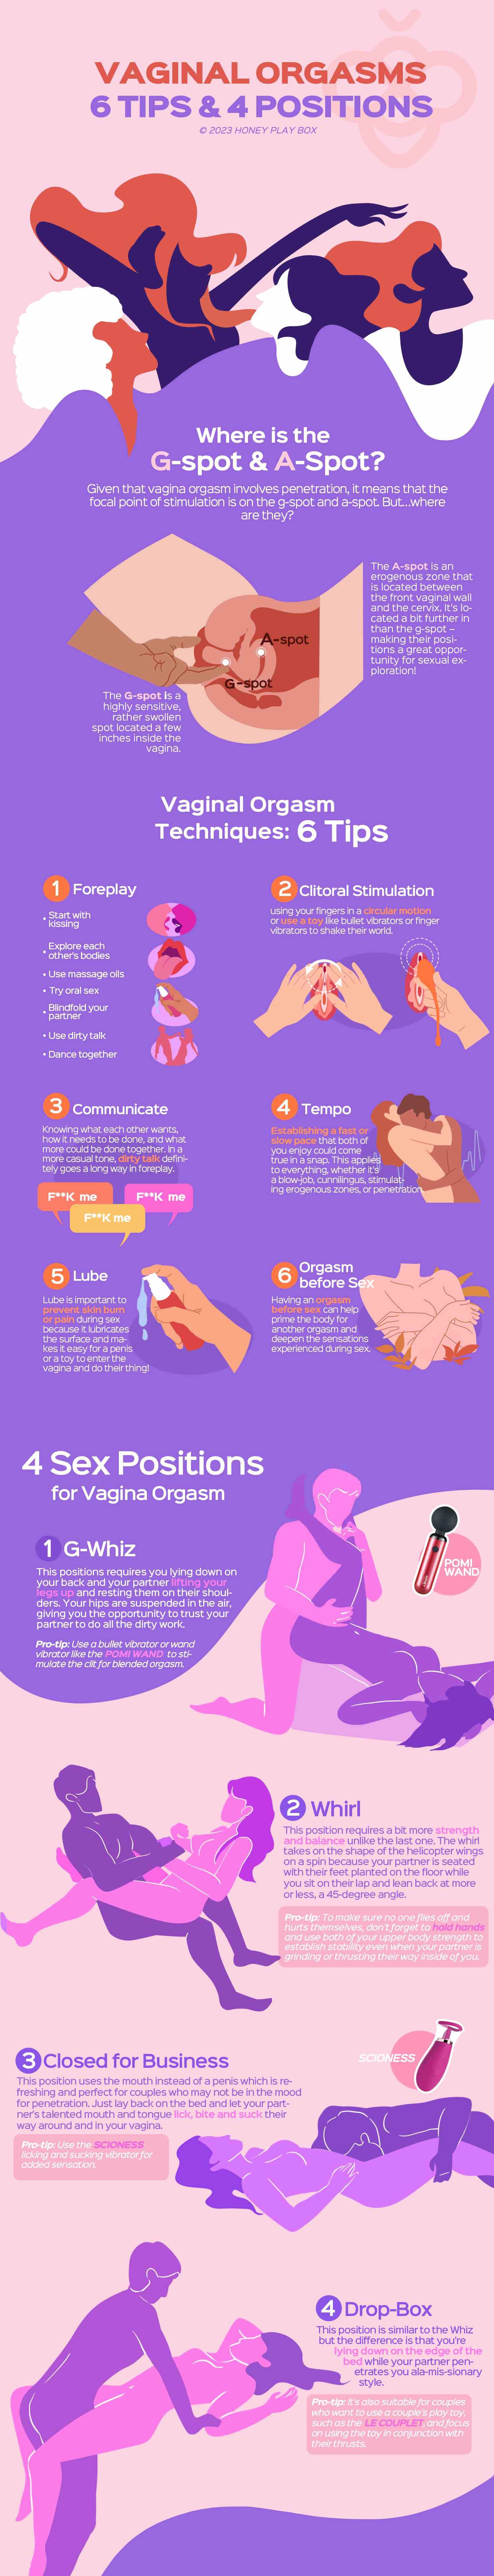 Vaginal Orgasms：An Updated Classic with 6 Tips & 4 Positions